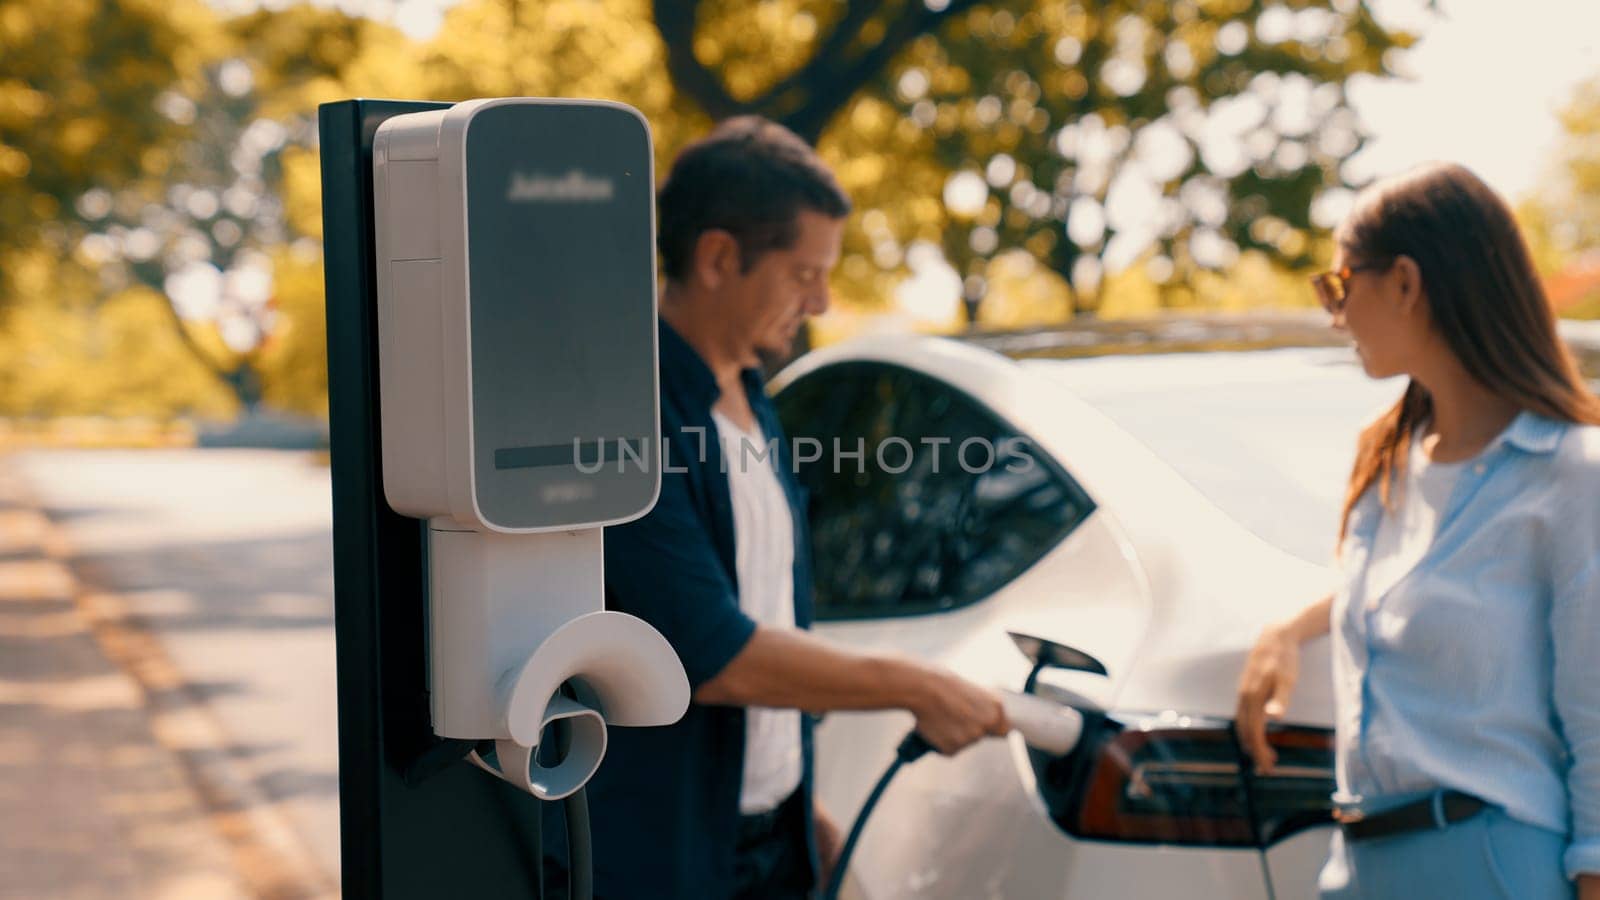 EV car recharging electricity for battery by lovey couple on road trip. Exalt by biancoblue